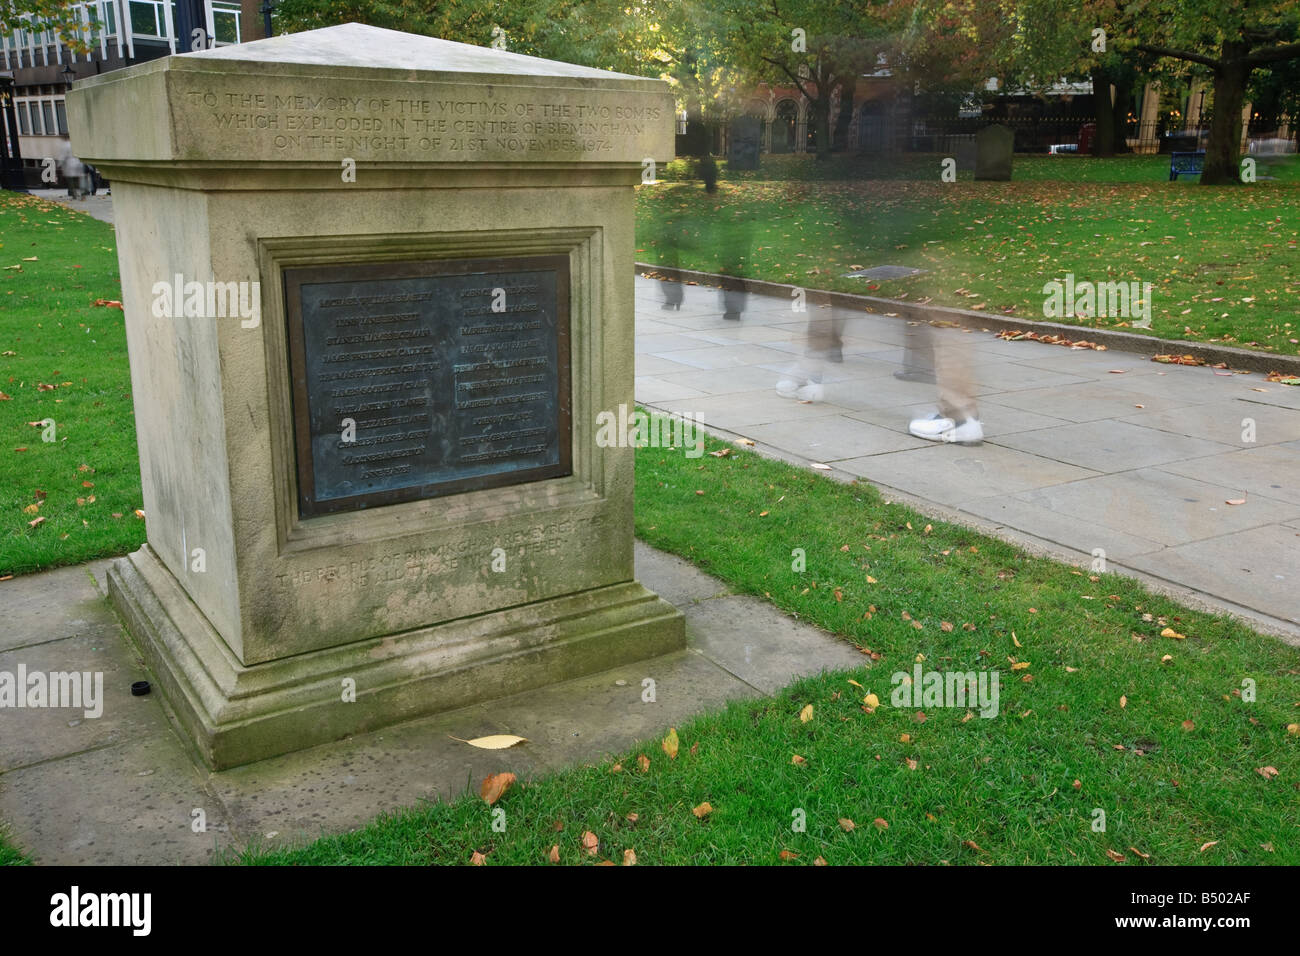 A memorial plaque, commemorating the victims of the bombings, situated in the grounds of St. Philip's Cathedral, Birmingham Stock Photo